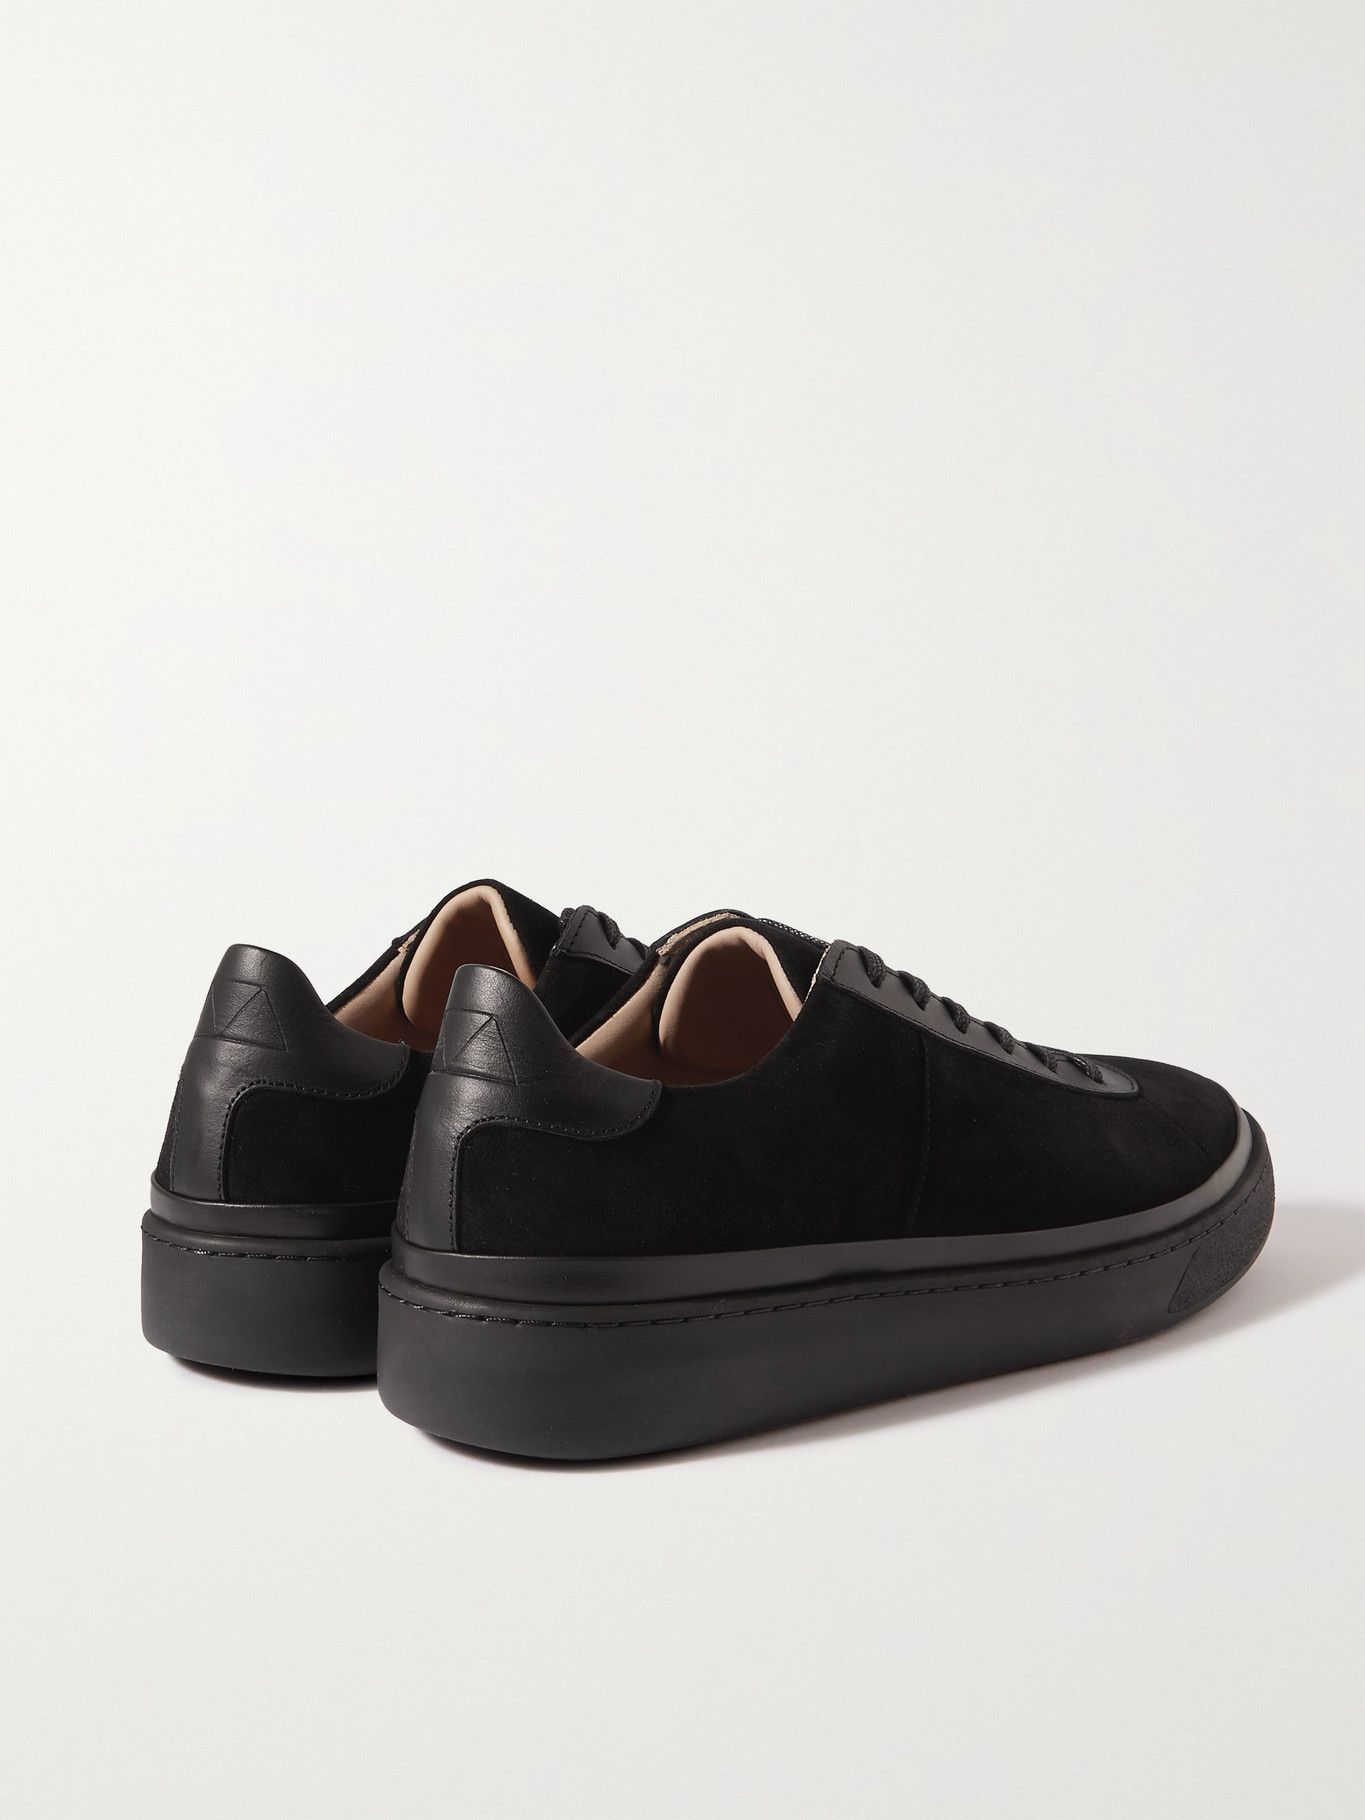 MULO - Leather-Trimmed Suede Sneakers - Black Mulo